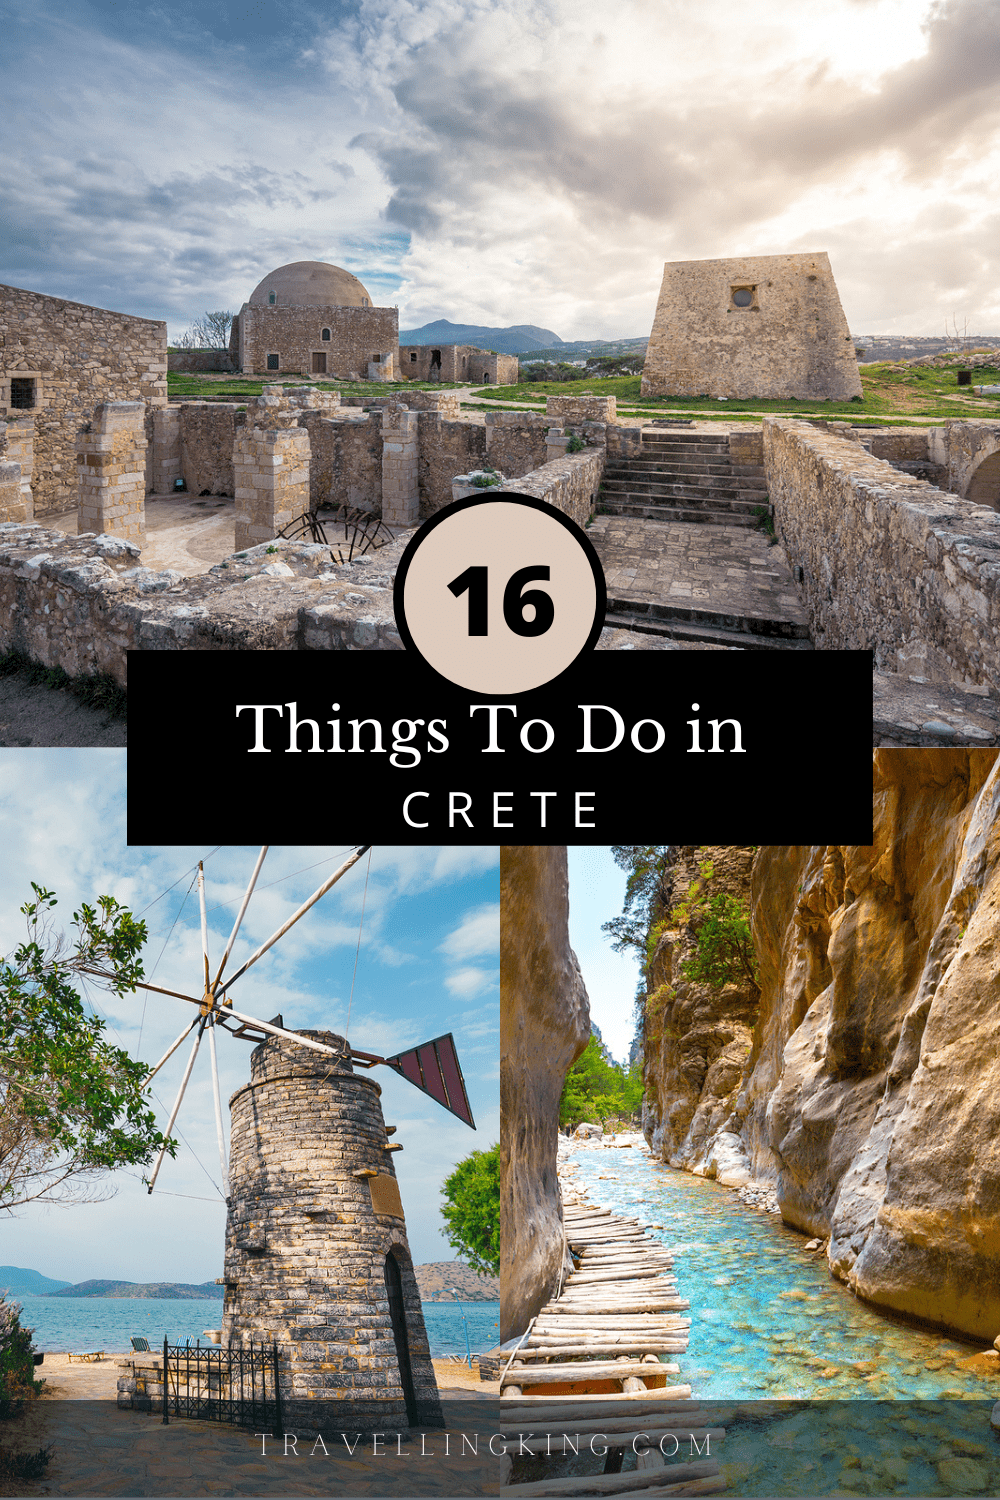 16 Things to do in Crete